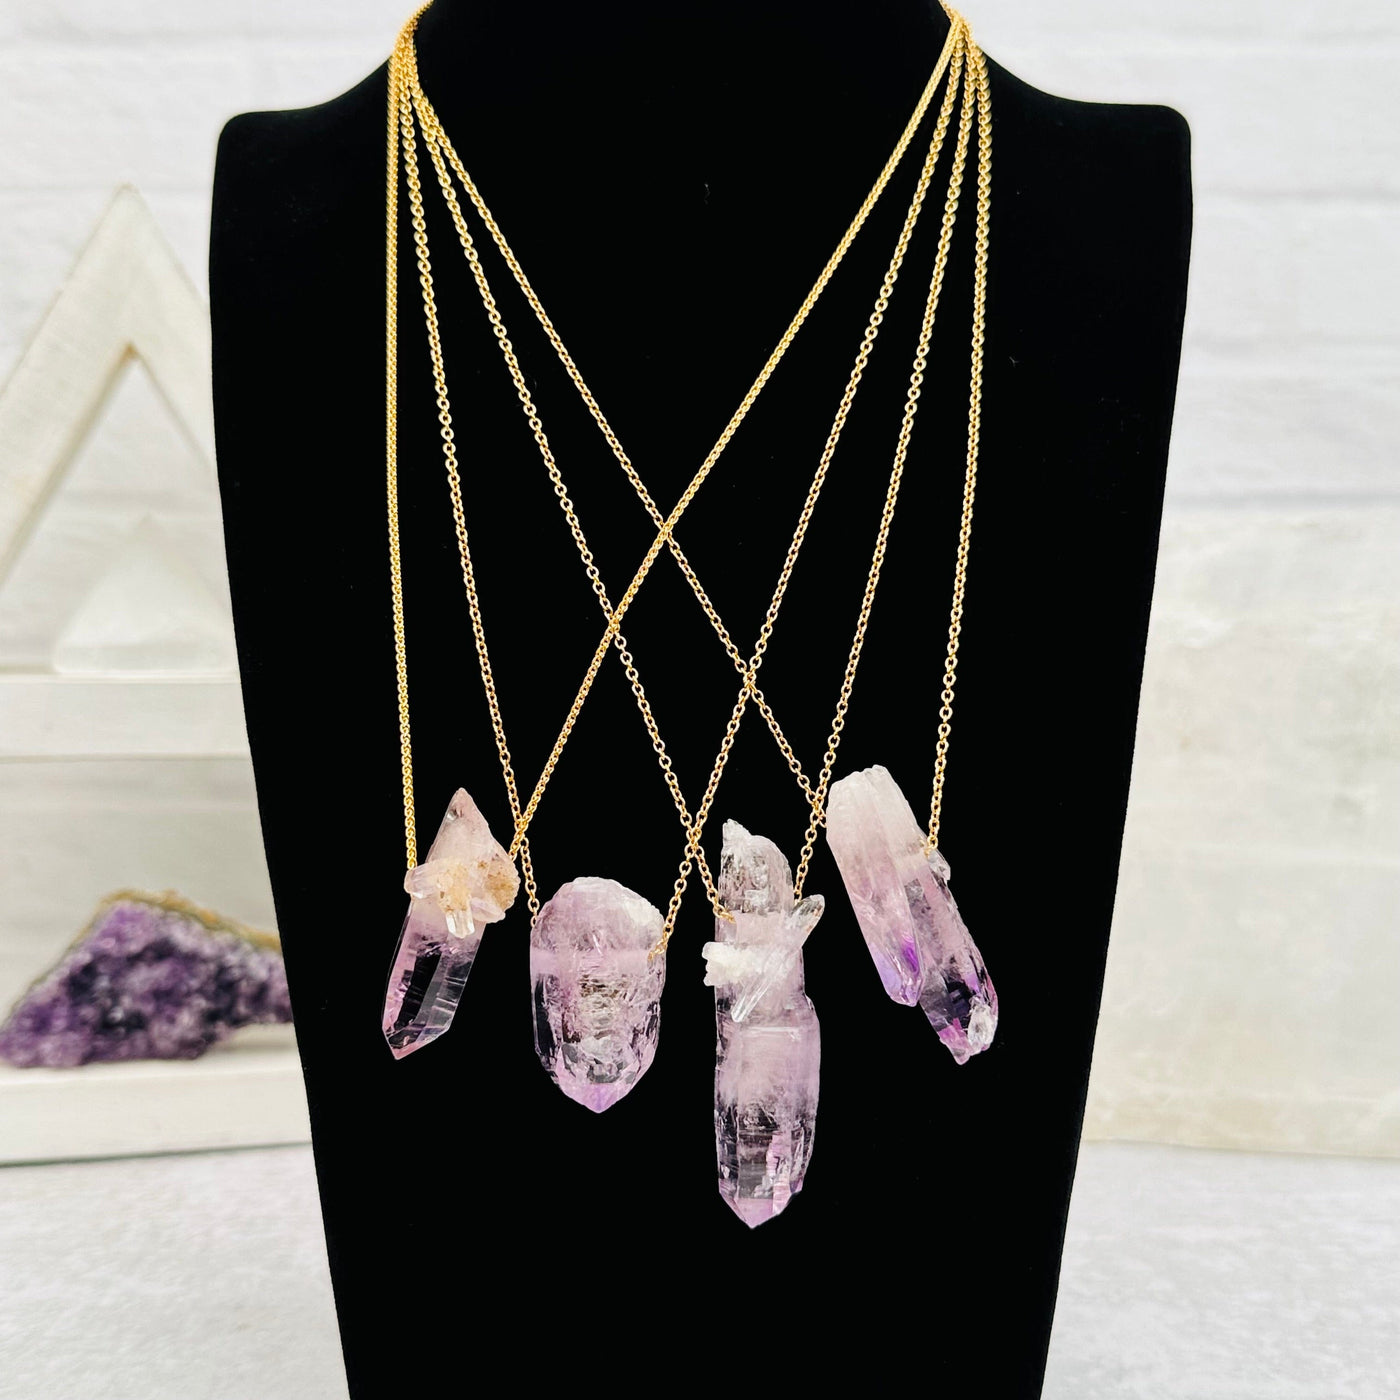 Veracruz Amethyst Necklaces displayed too show the differences in the sizes and color shades 